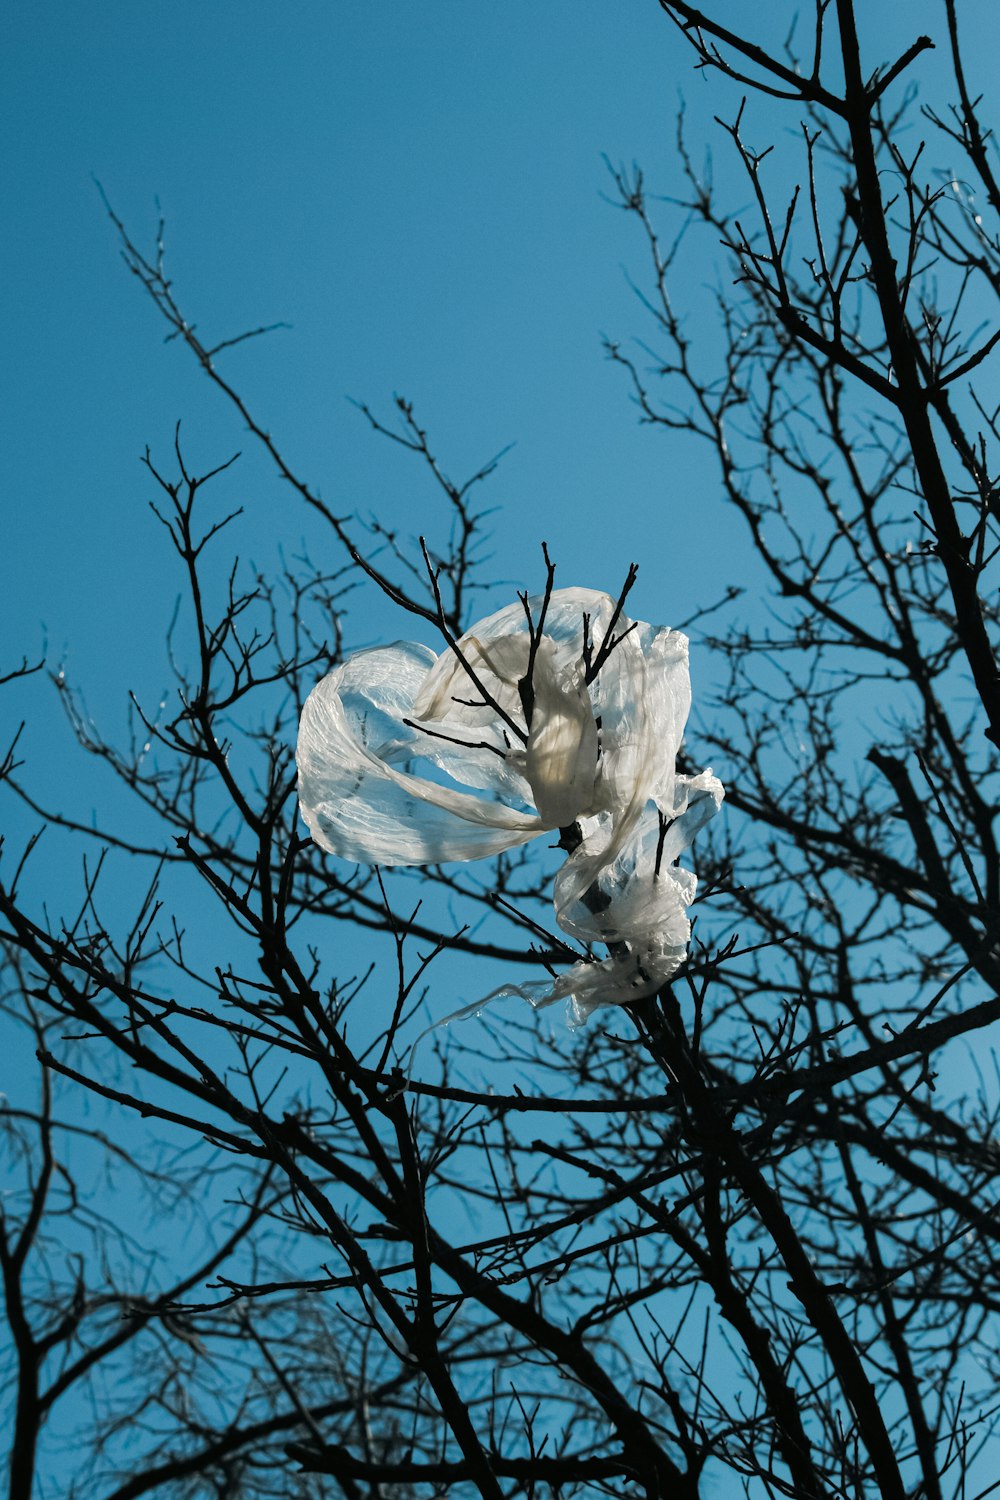 a plastic bag stuck in a tree with no leaves